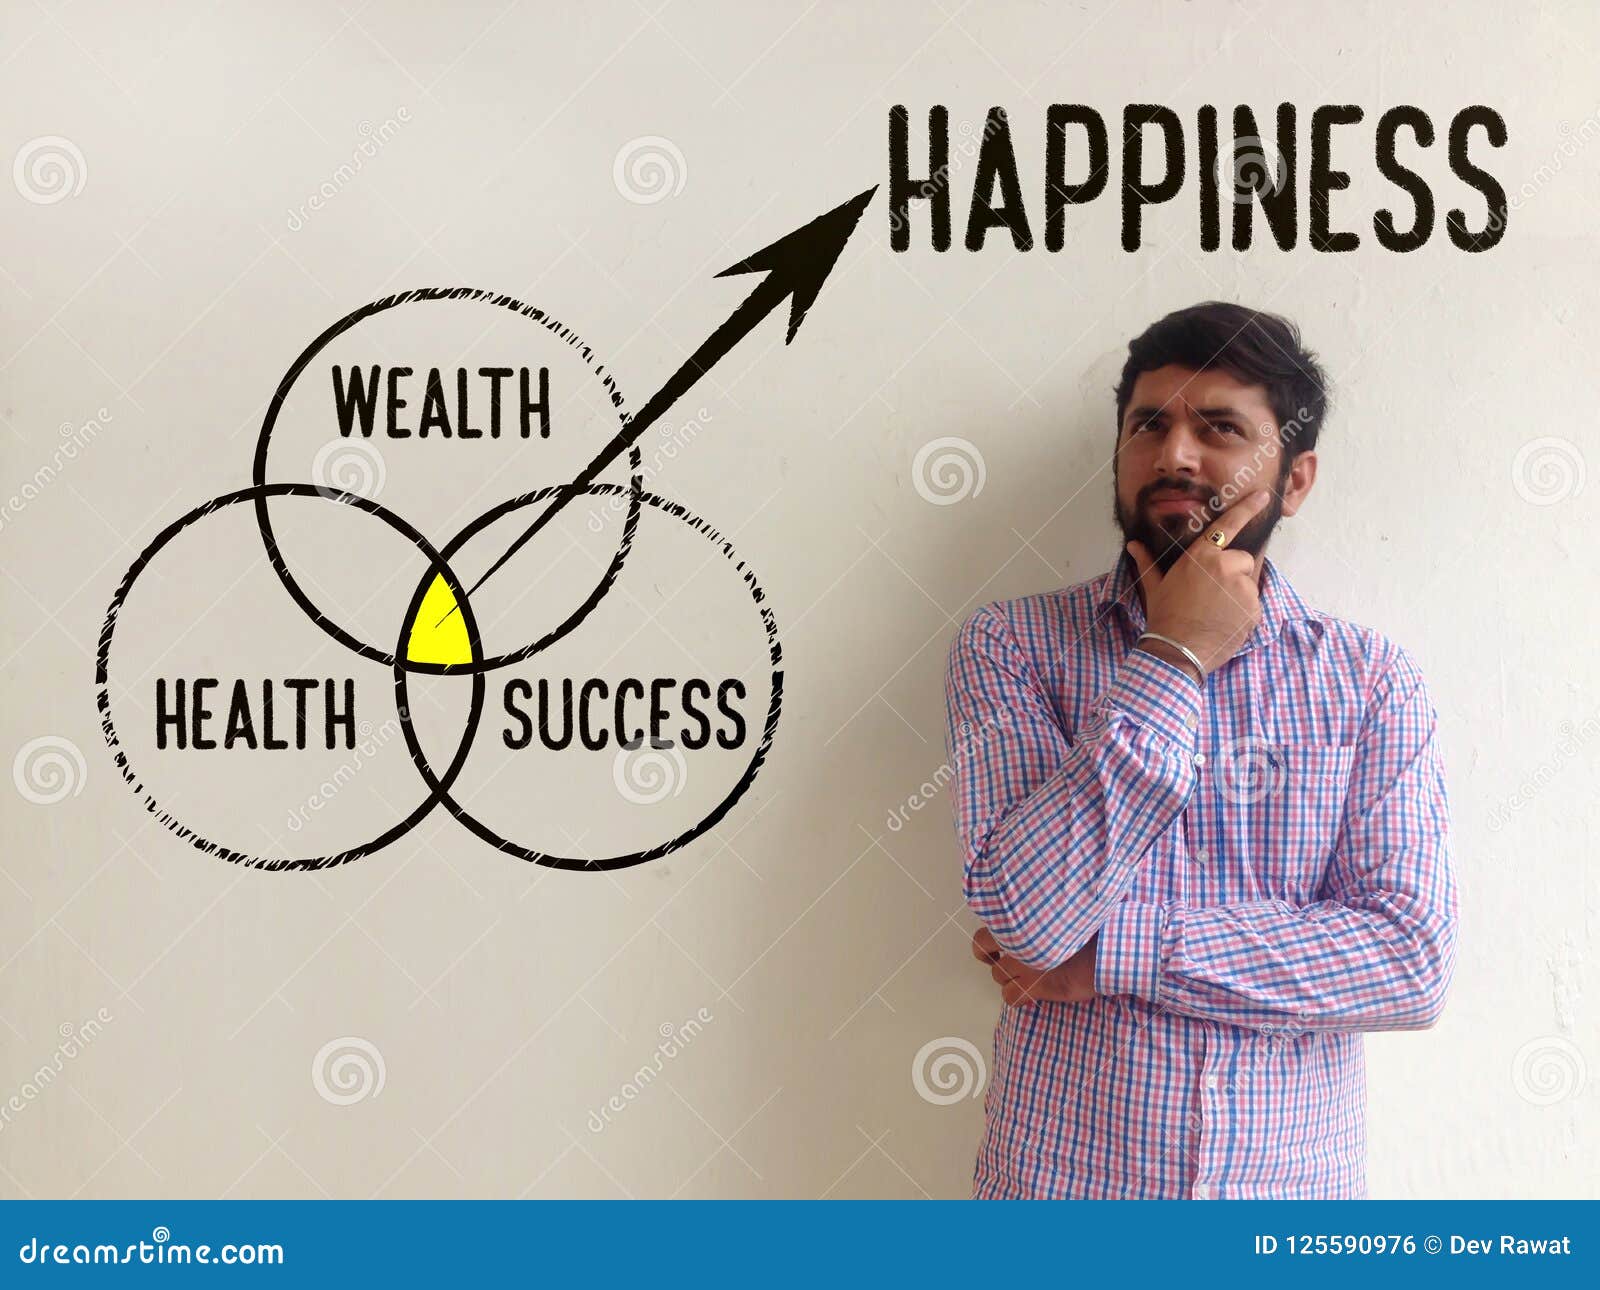 Health Wealth And Success That Combined Leads To Happiness Stock Photo